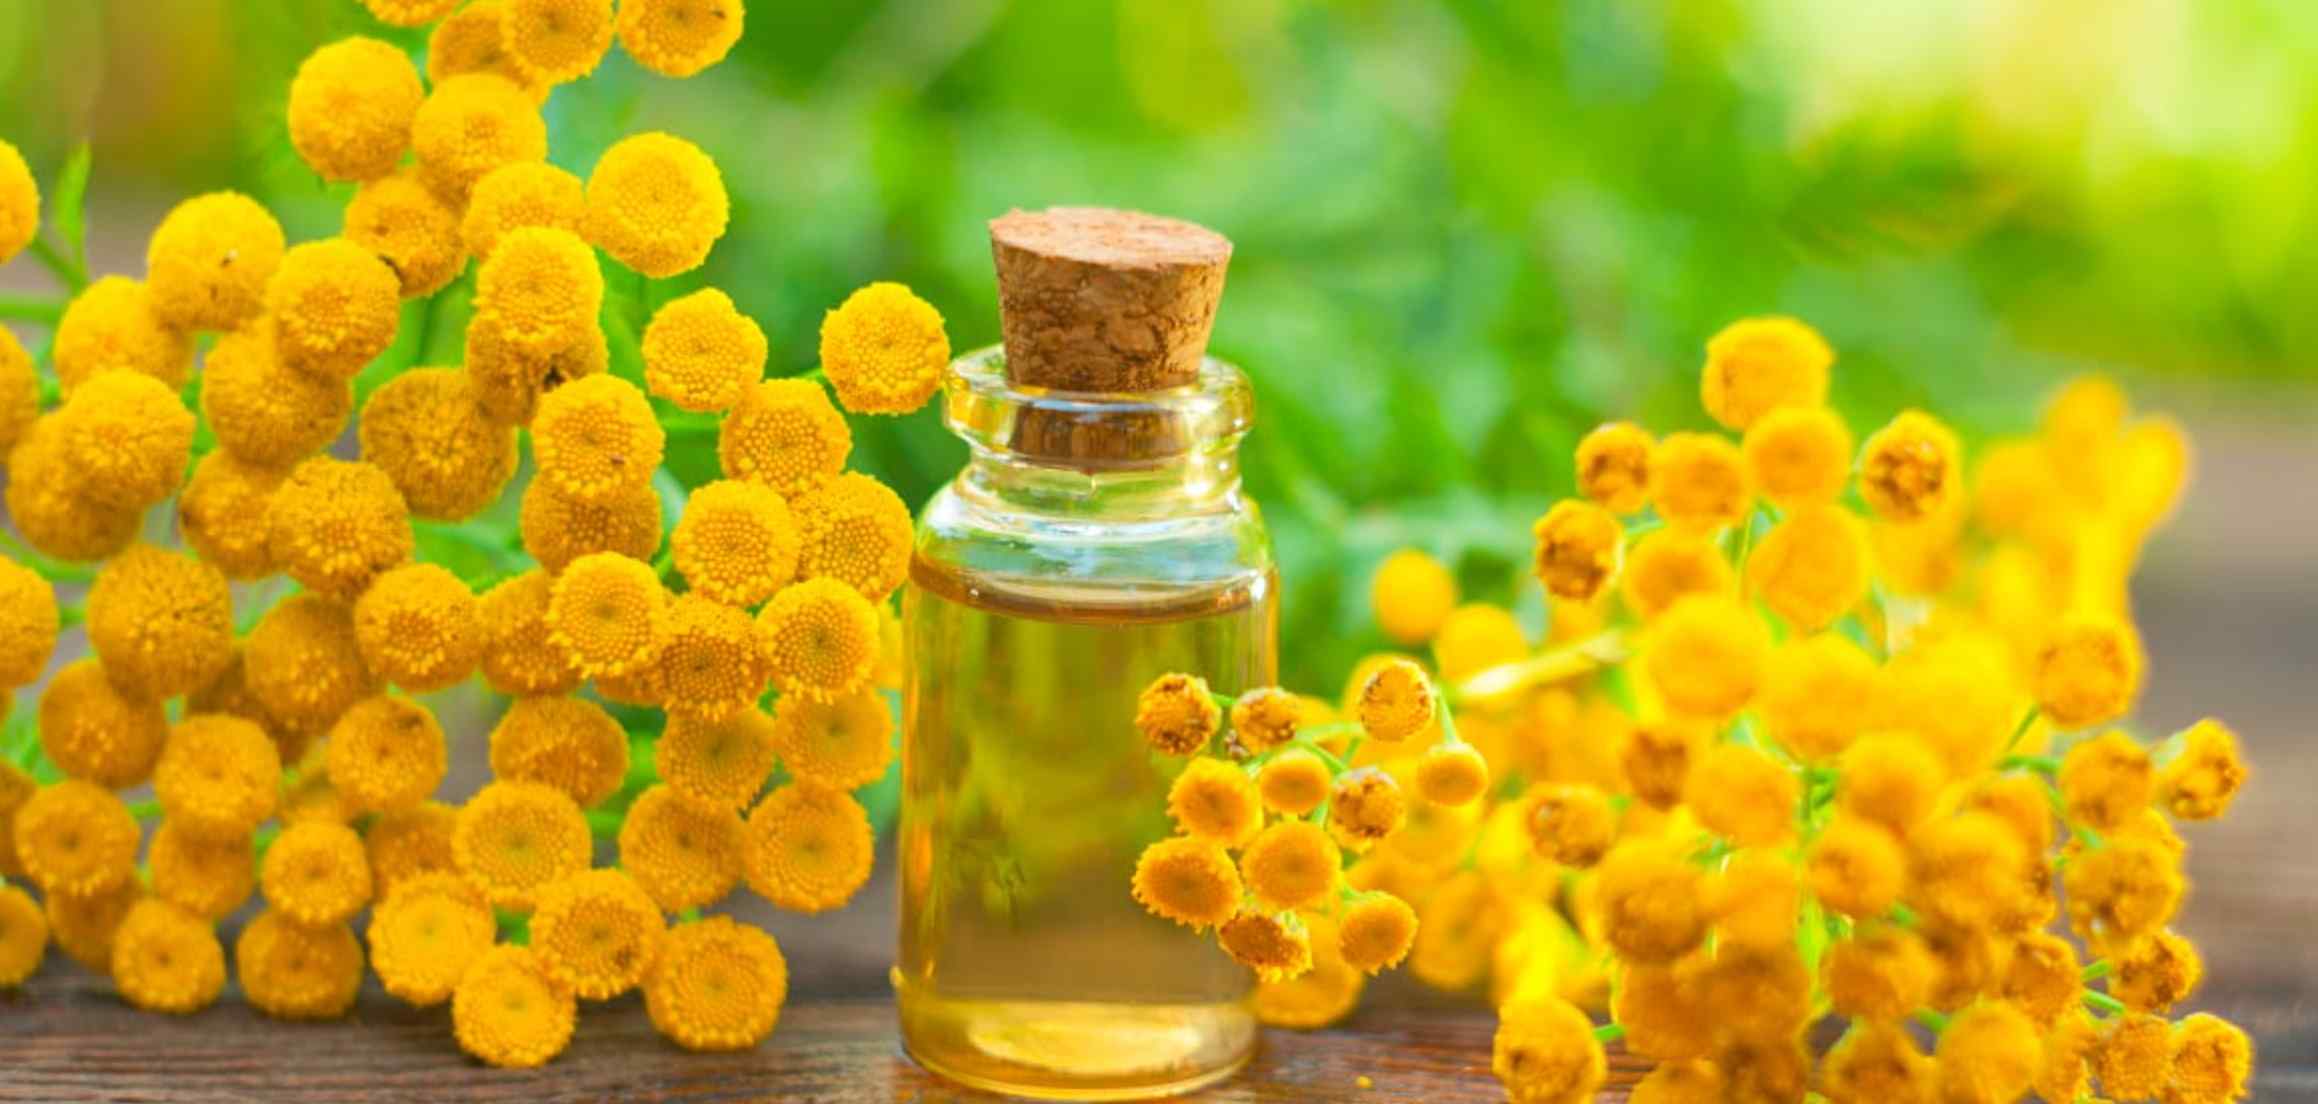 The image displays various uses of organic Blue Tansy essential oil in skincare and aromatherapy for relaxation and wellness.